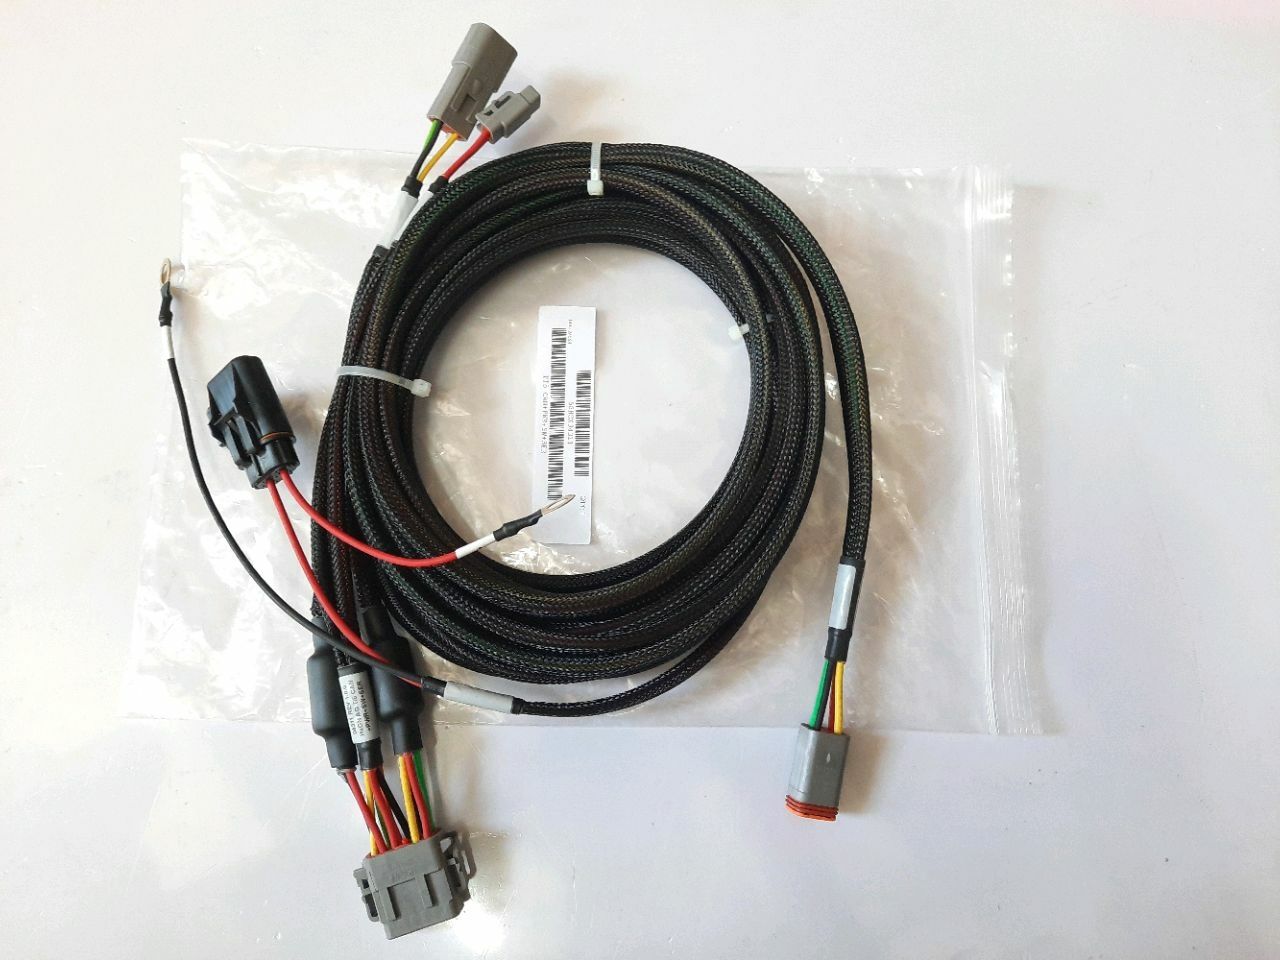 Ti5 cable+can+power+switch